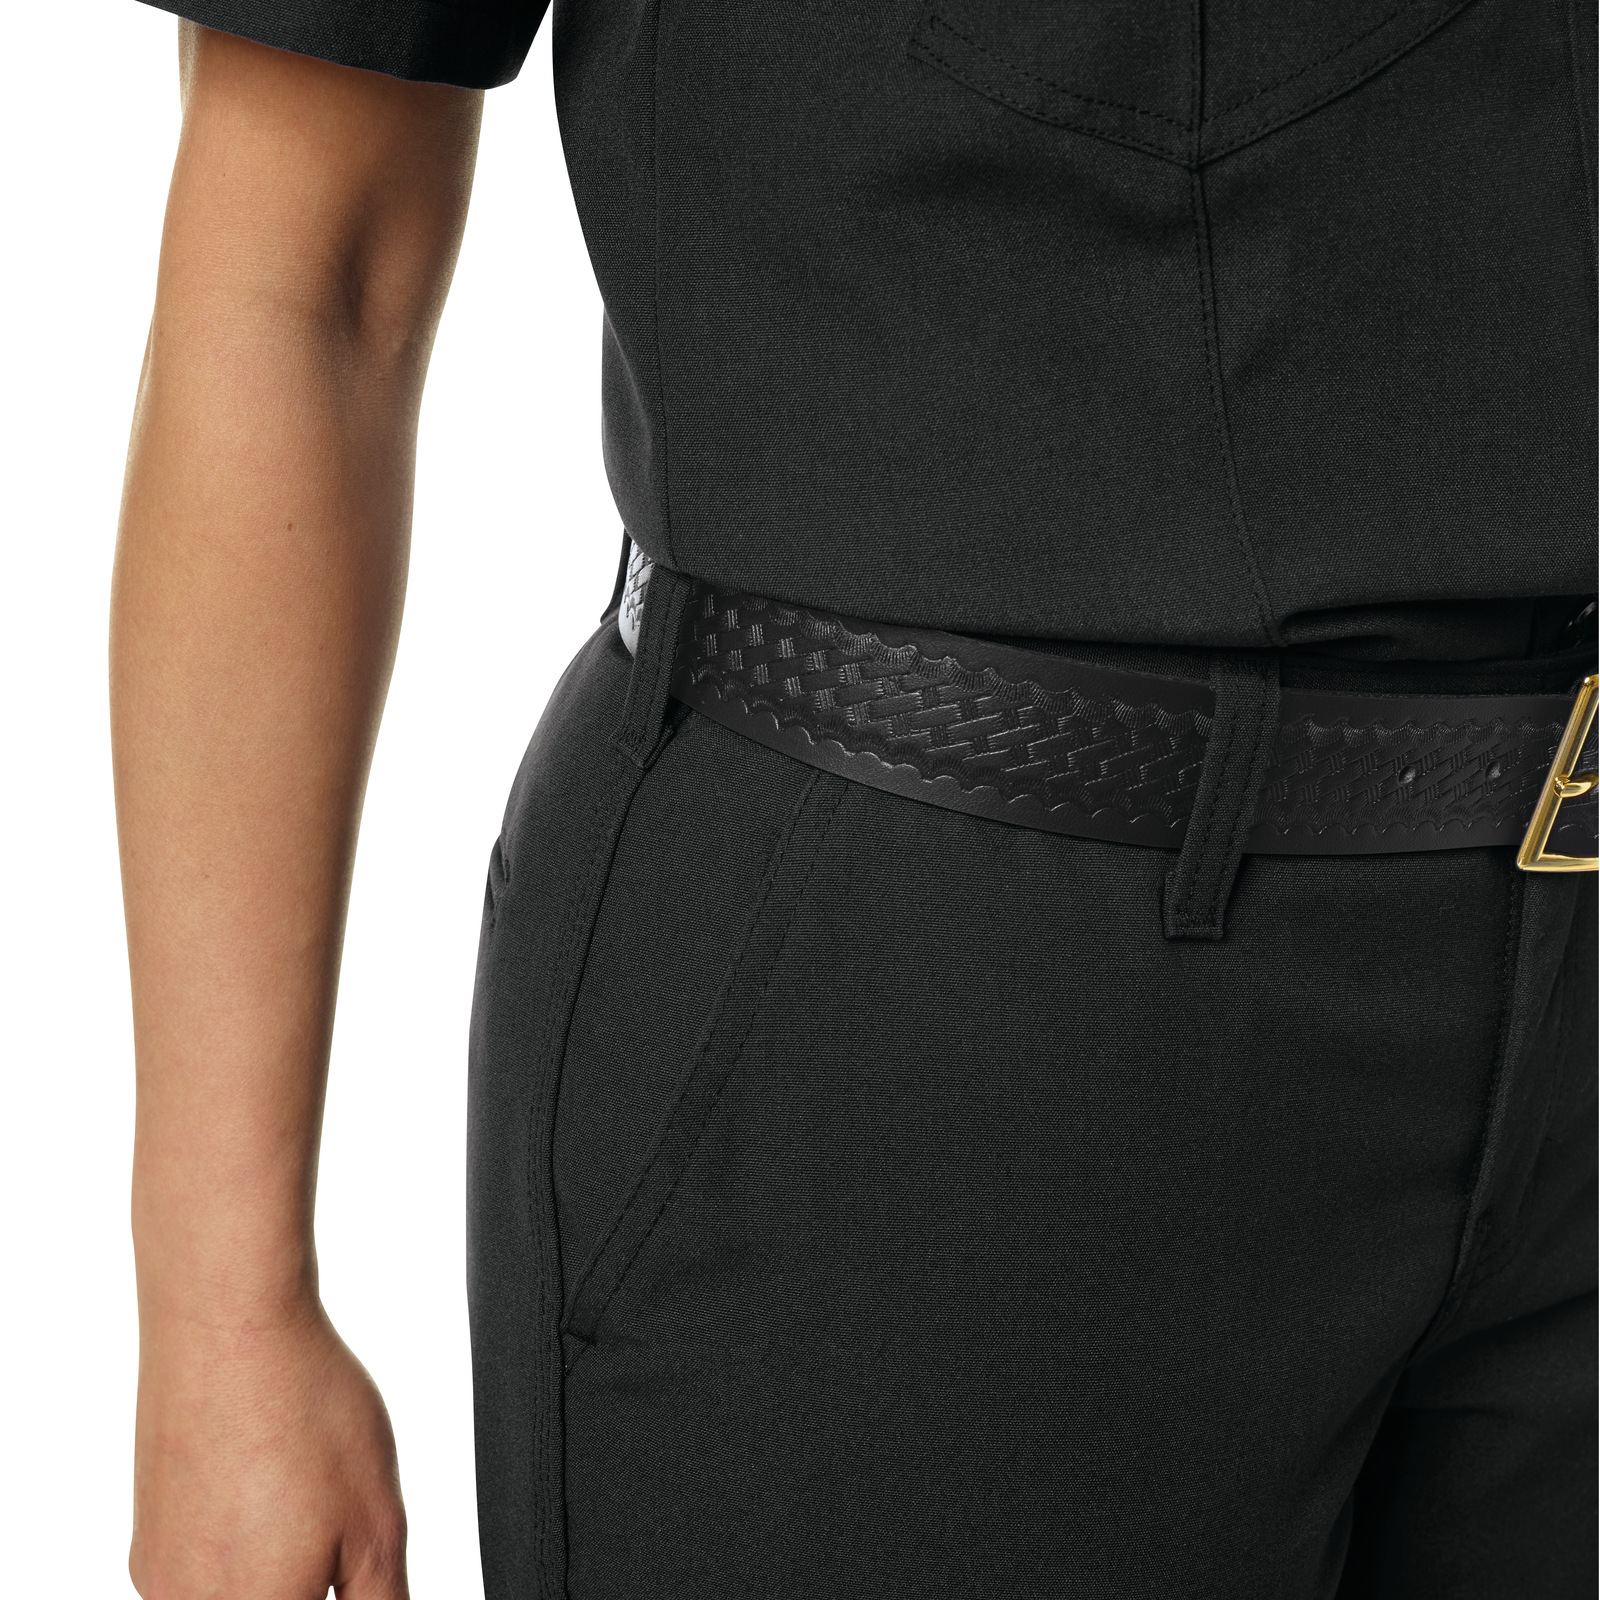 Workrite Women’s Classic Firefighter Pant (FP51) | Fire Store | Fuego Fire Center | Firefighter Gear | The classic look of a firefighter pant meets with smart features and a feminine fit that make this pant equally comfortable and highly functional.